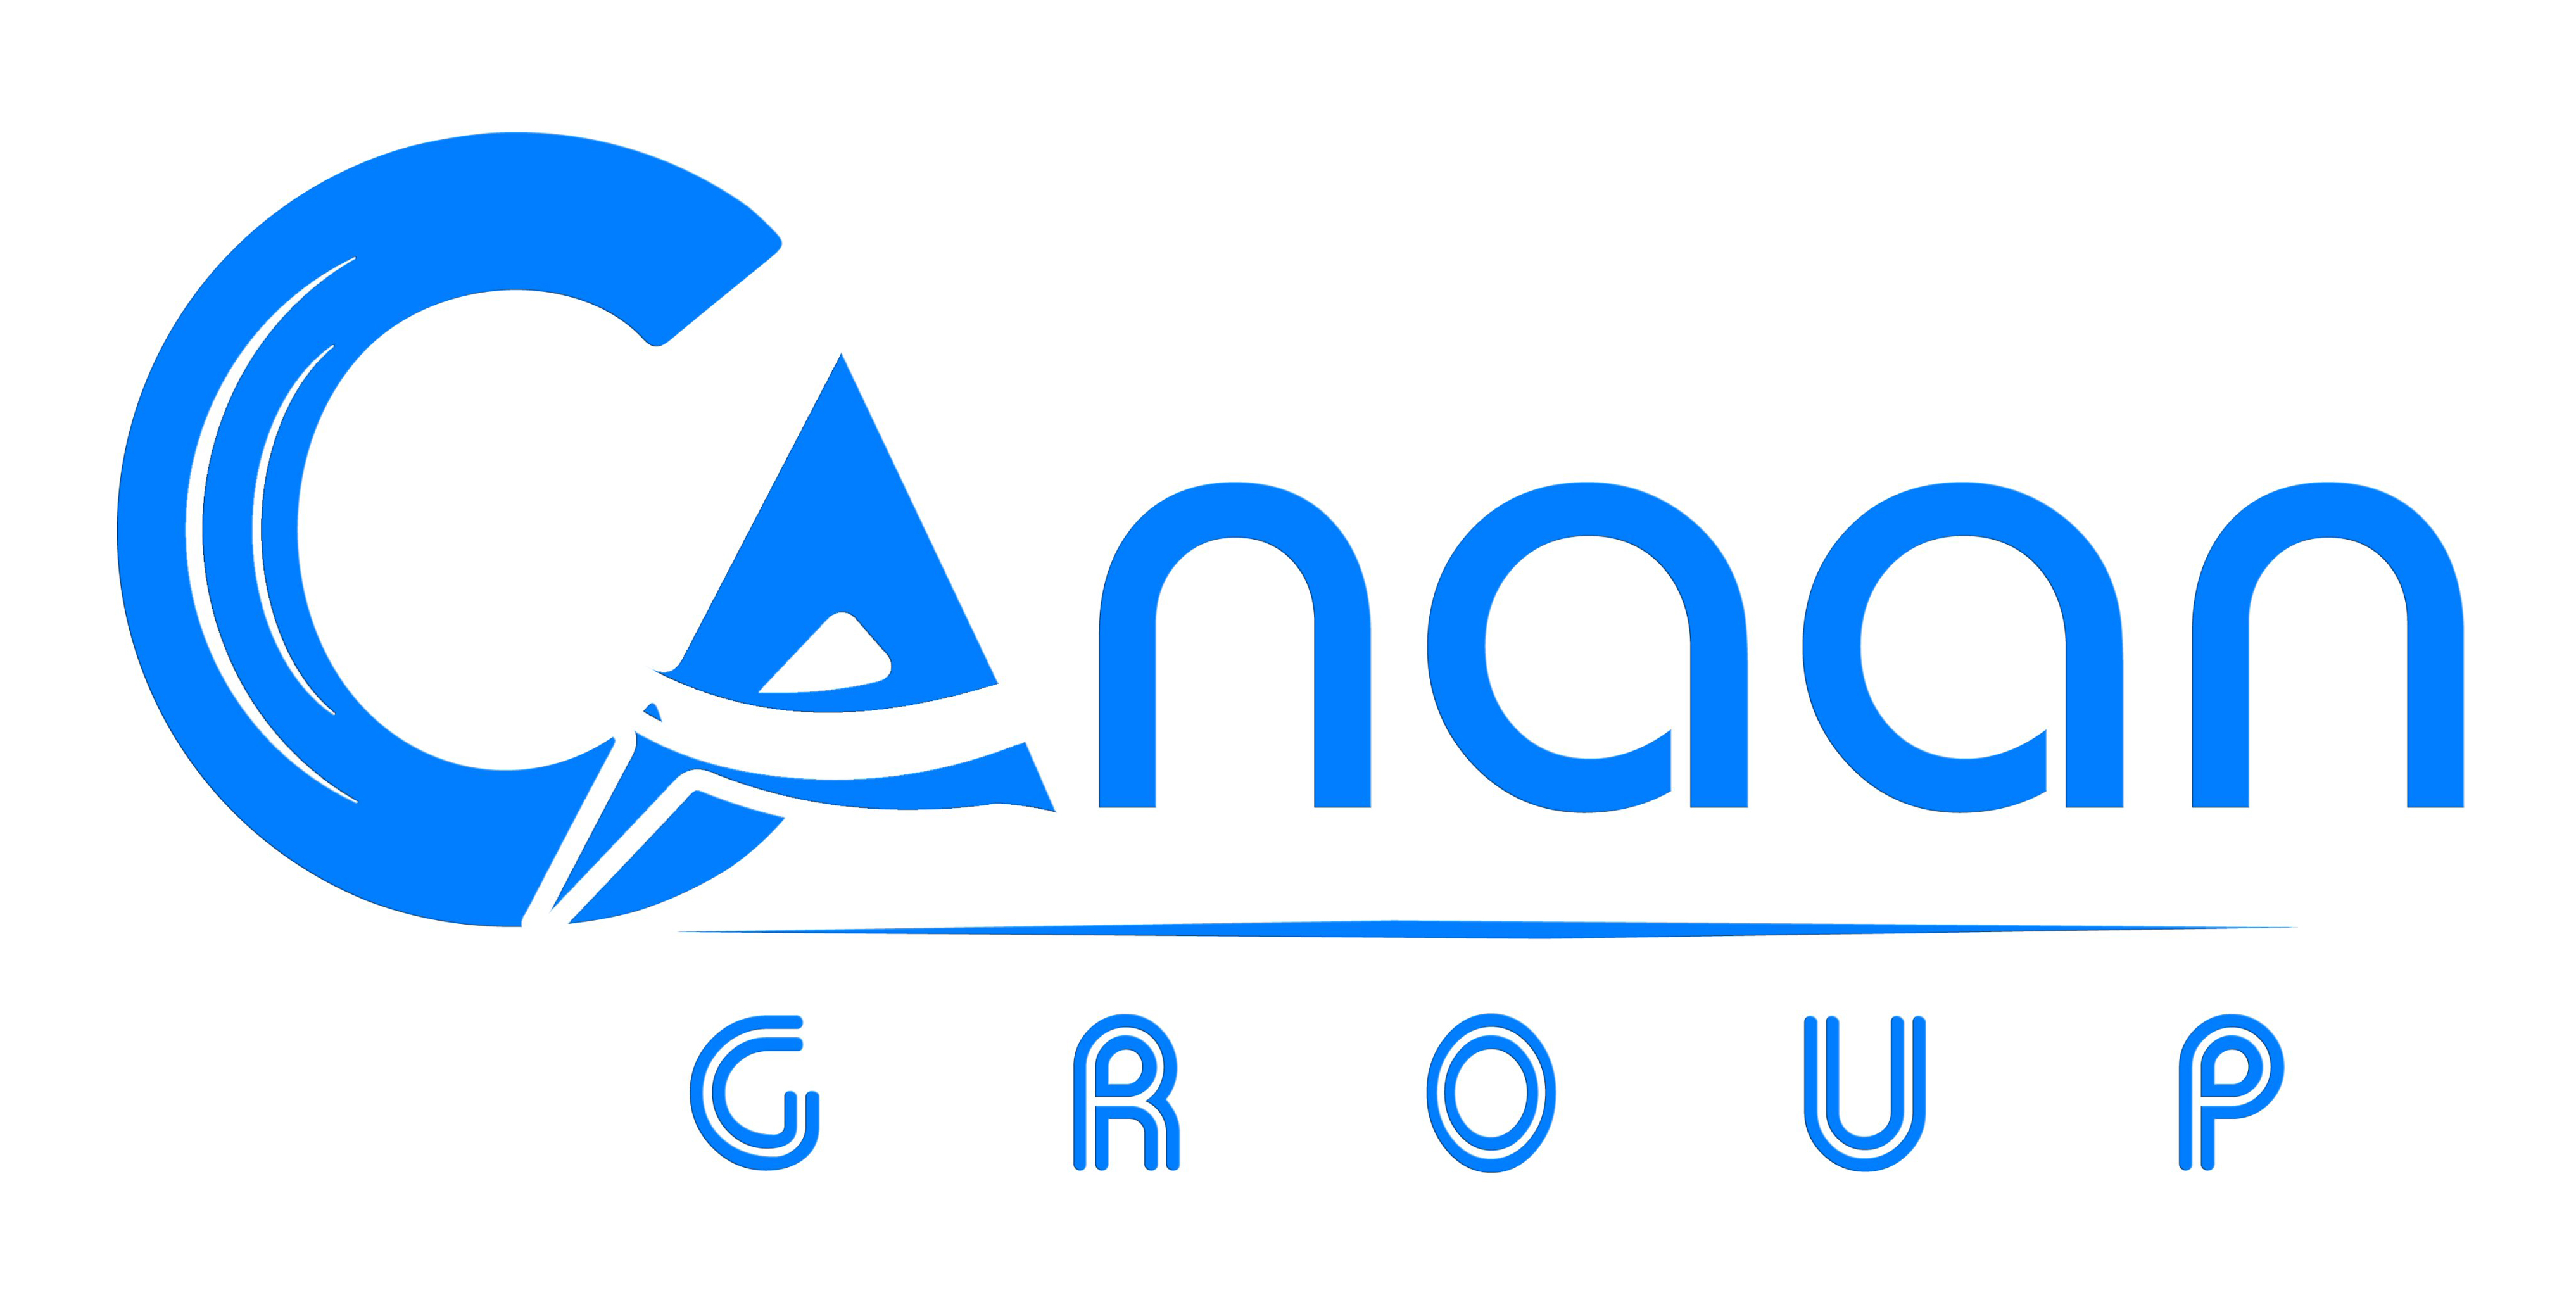 CANAAN GROUP